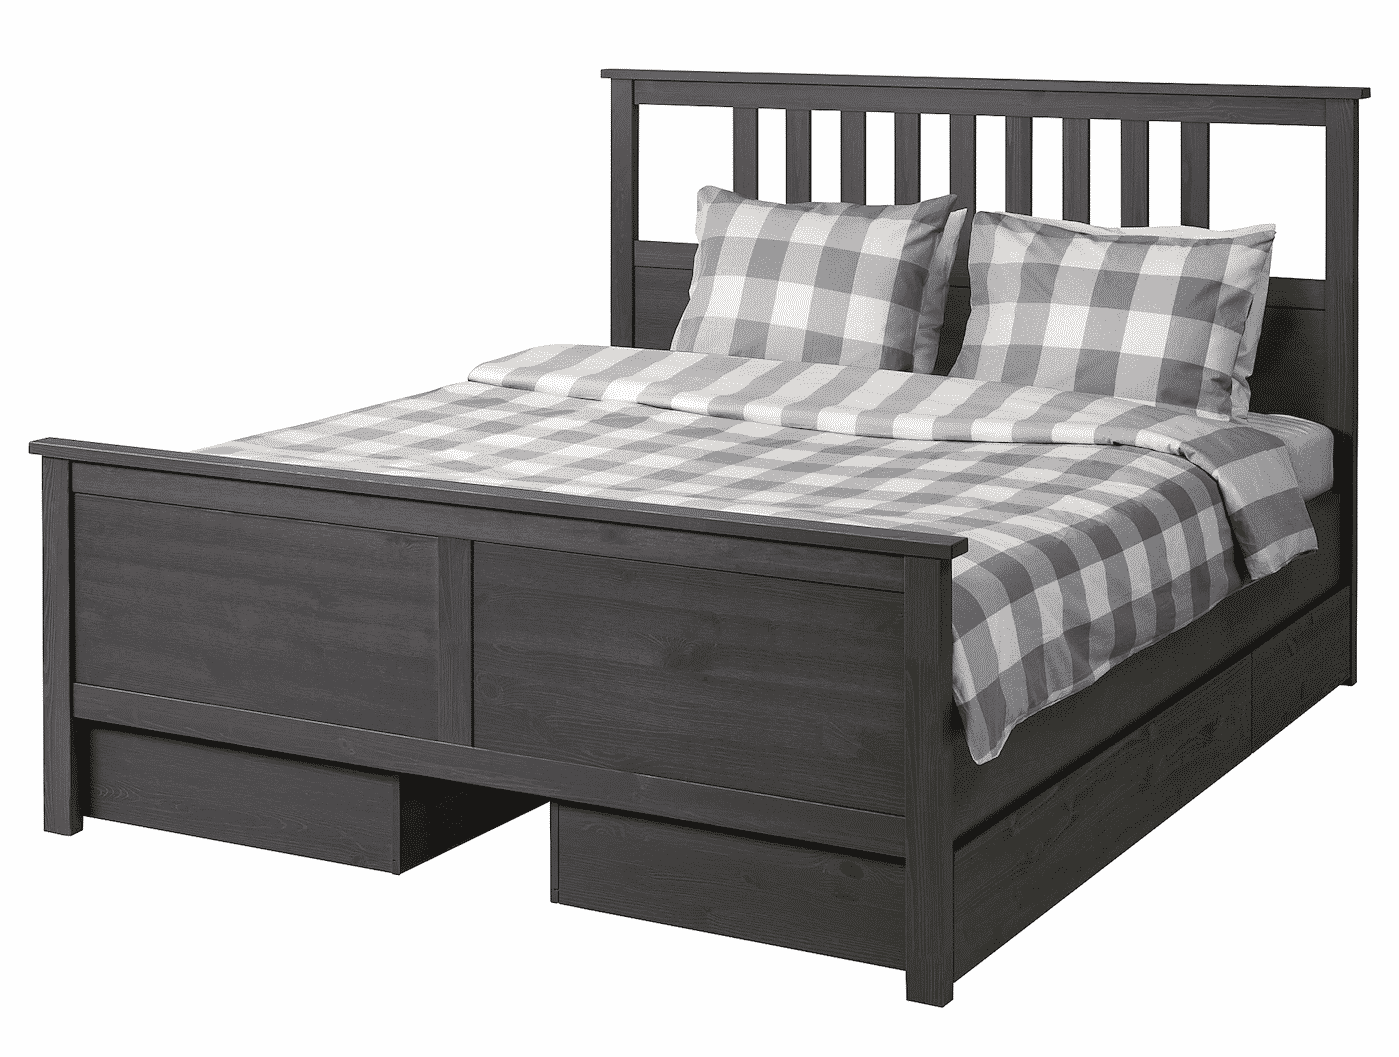 Hemnes Bed Frame With 4 Storage Boxes